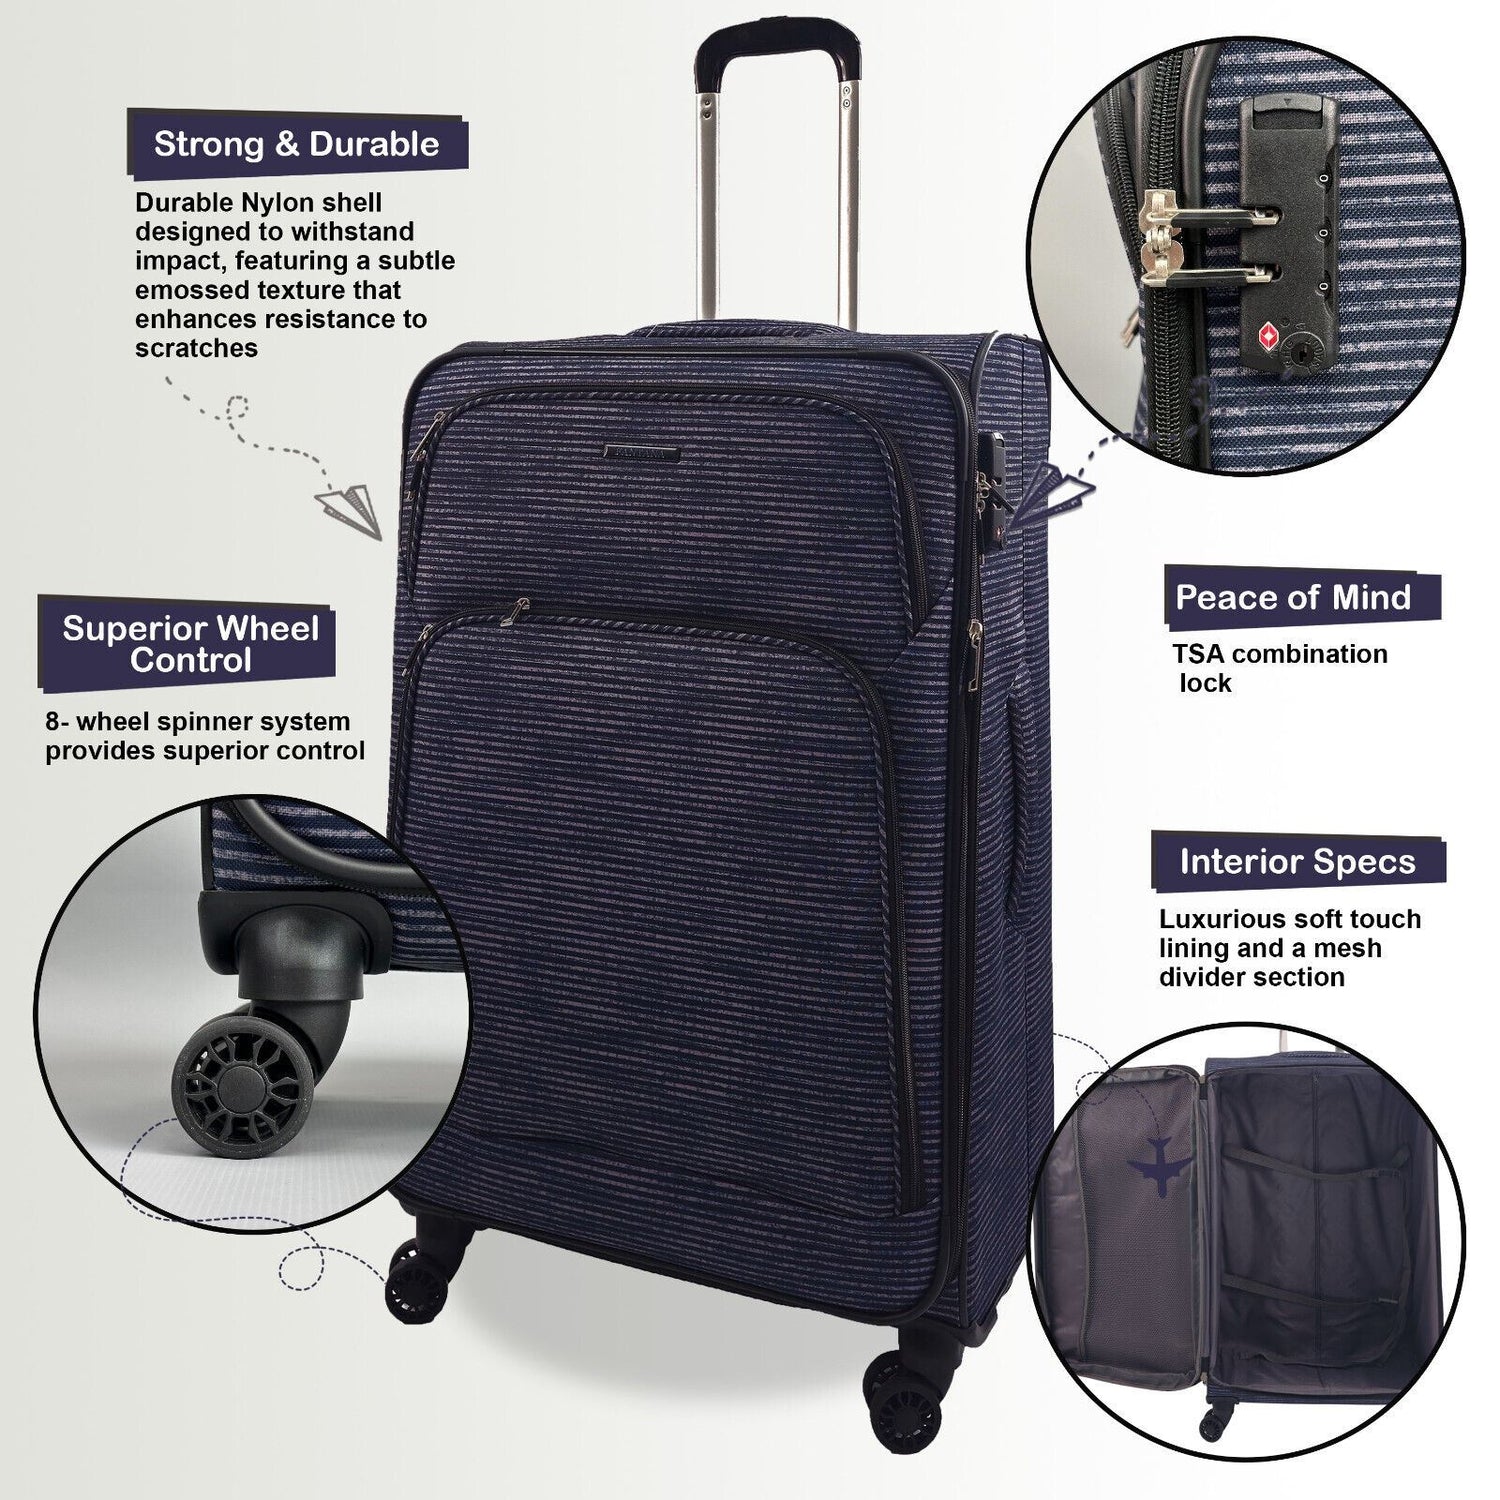 Ashville Large Soft Shell Suitcase in Lines